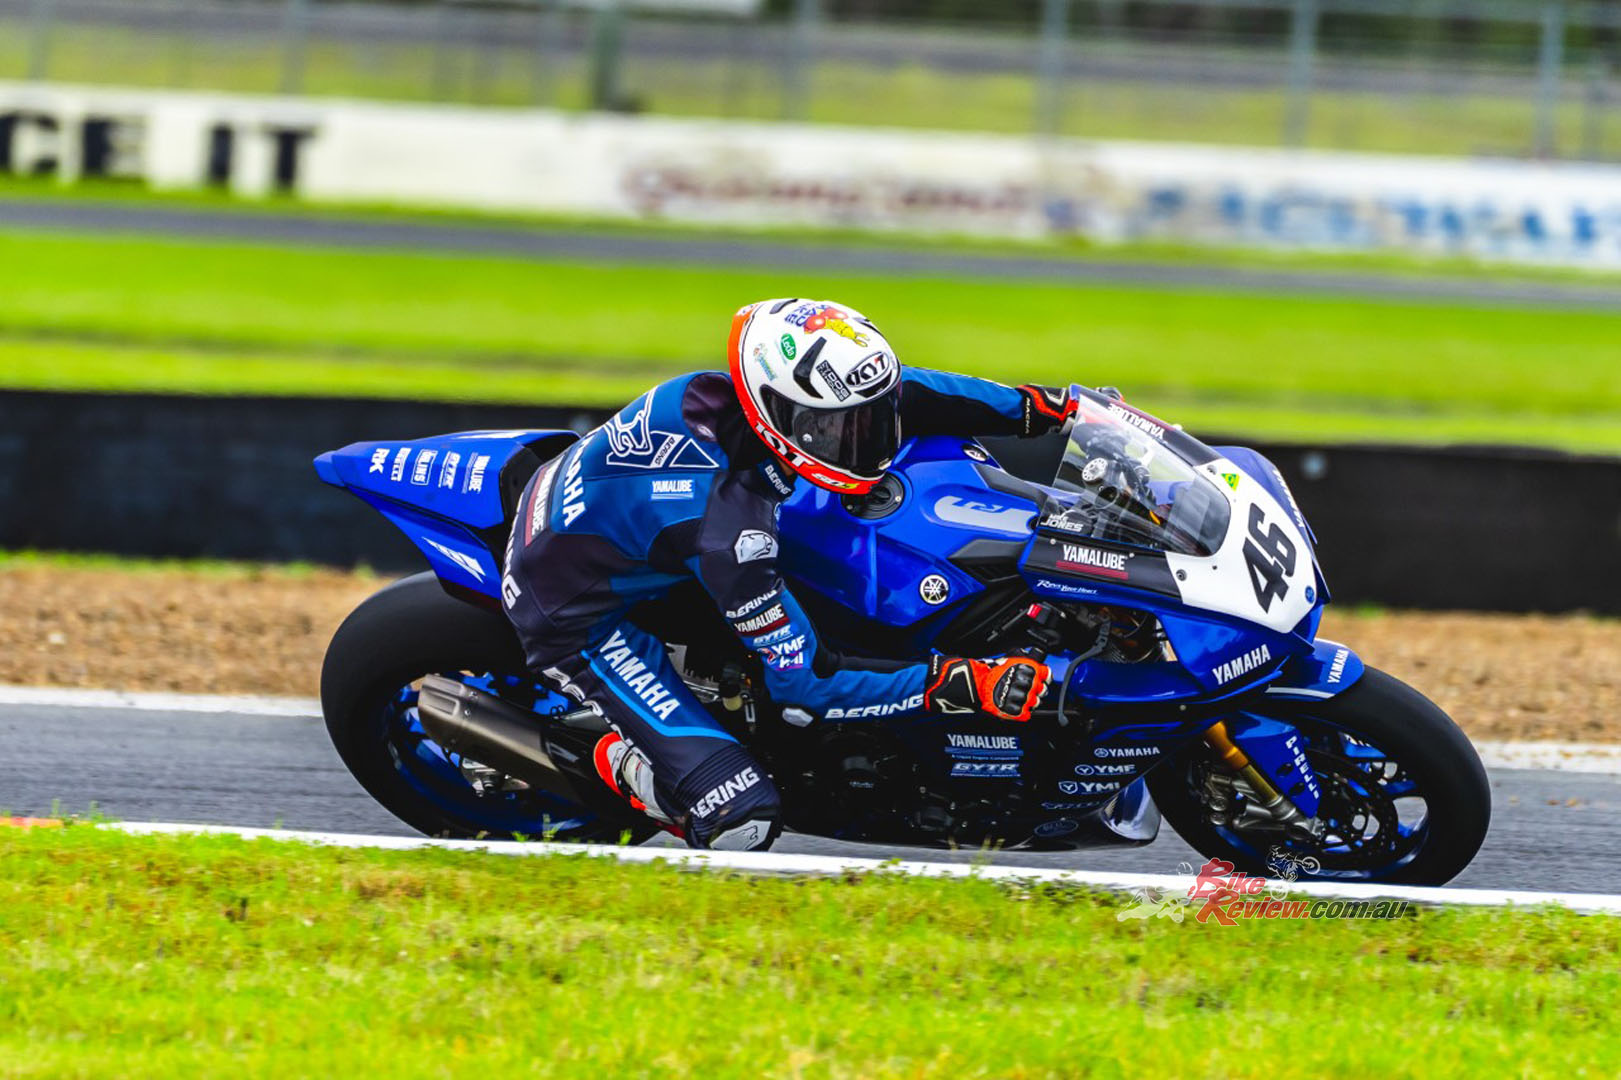 The Superbike division is loaded with talent in 2022 with plenty choosing the Yamaha R1 as their weapon of choice.